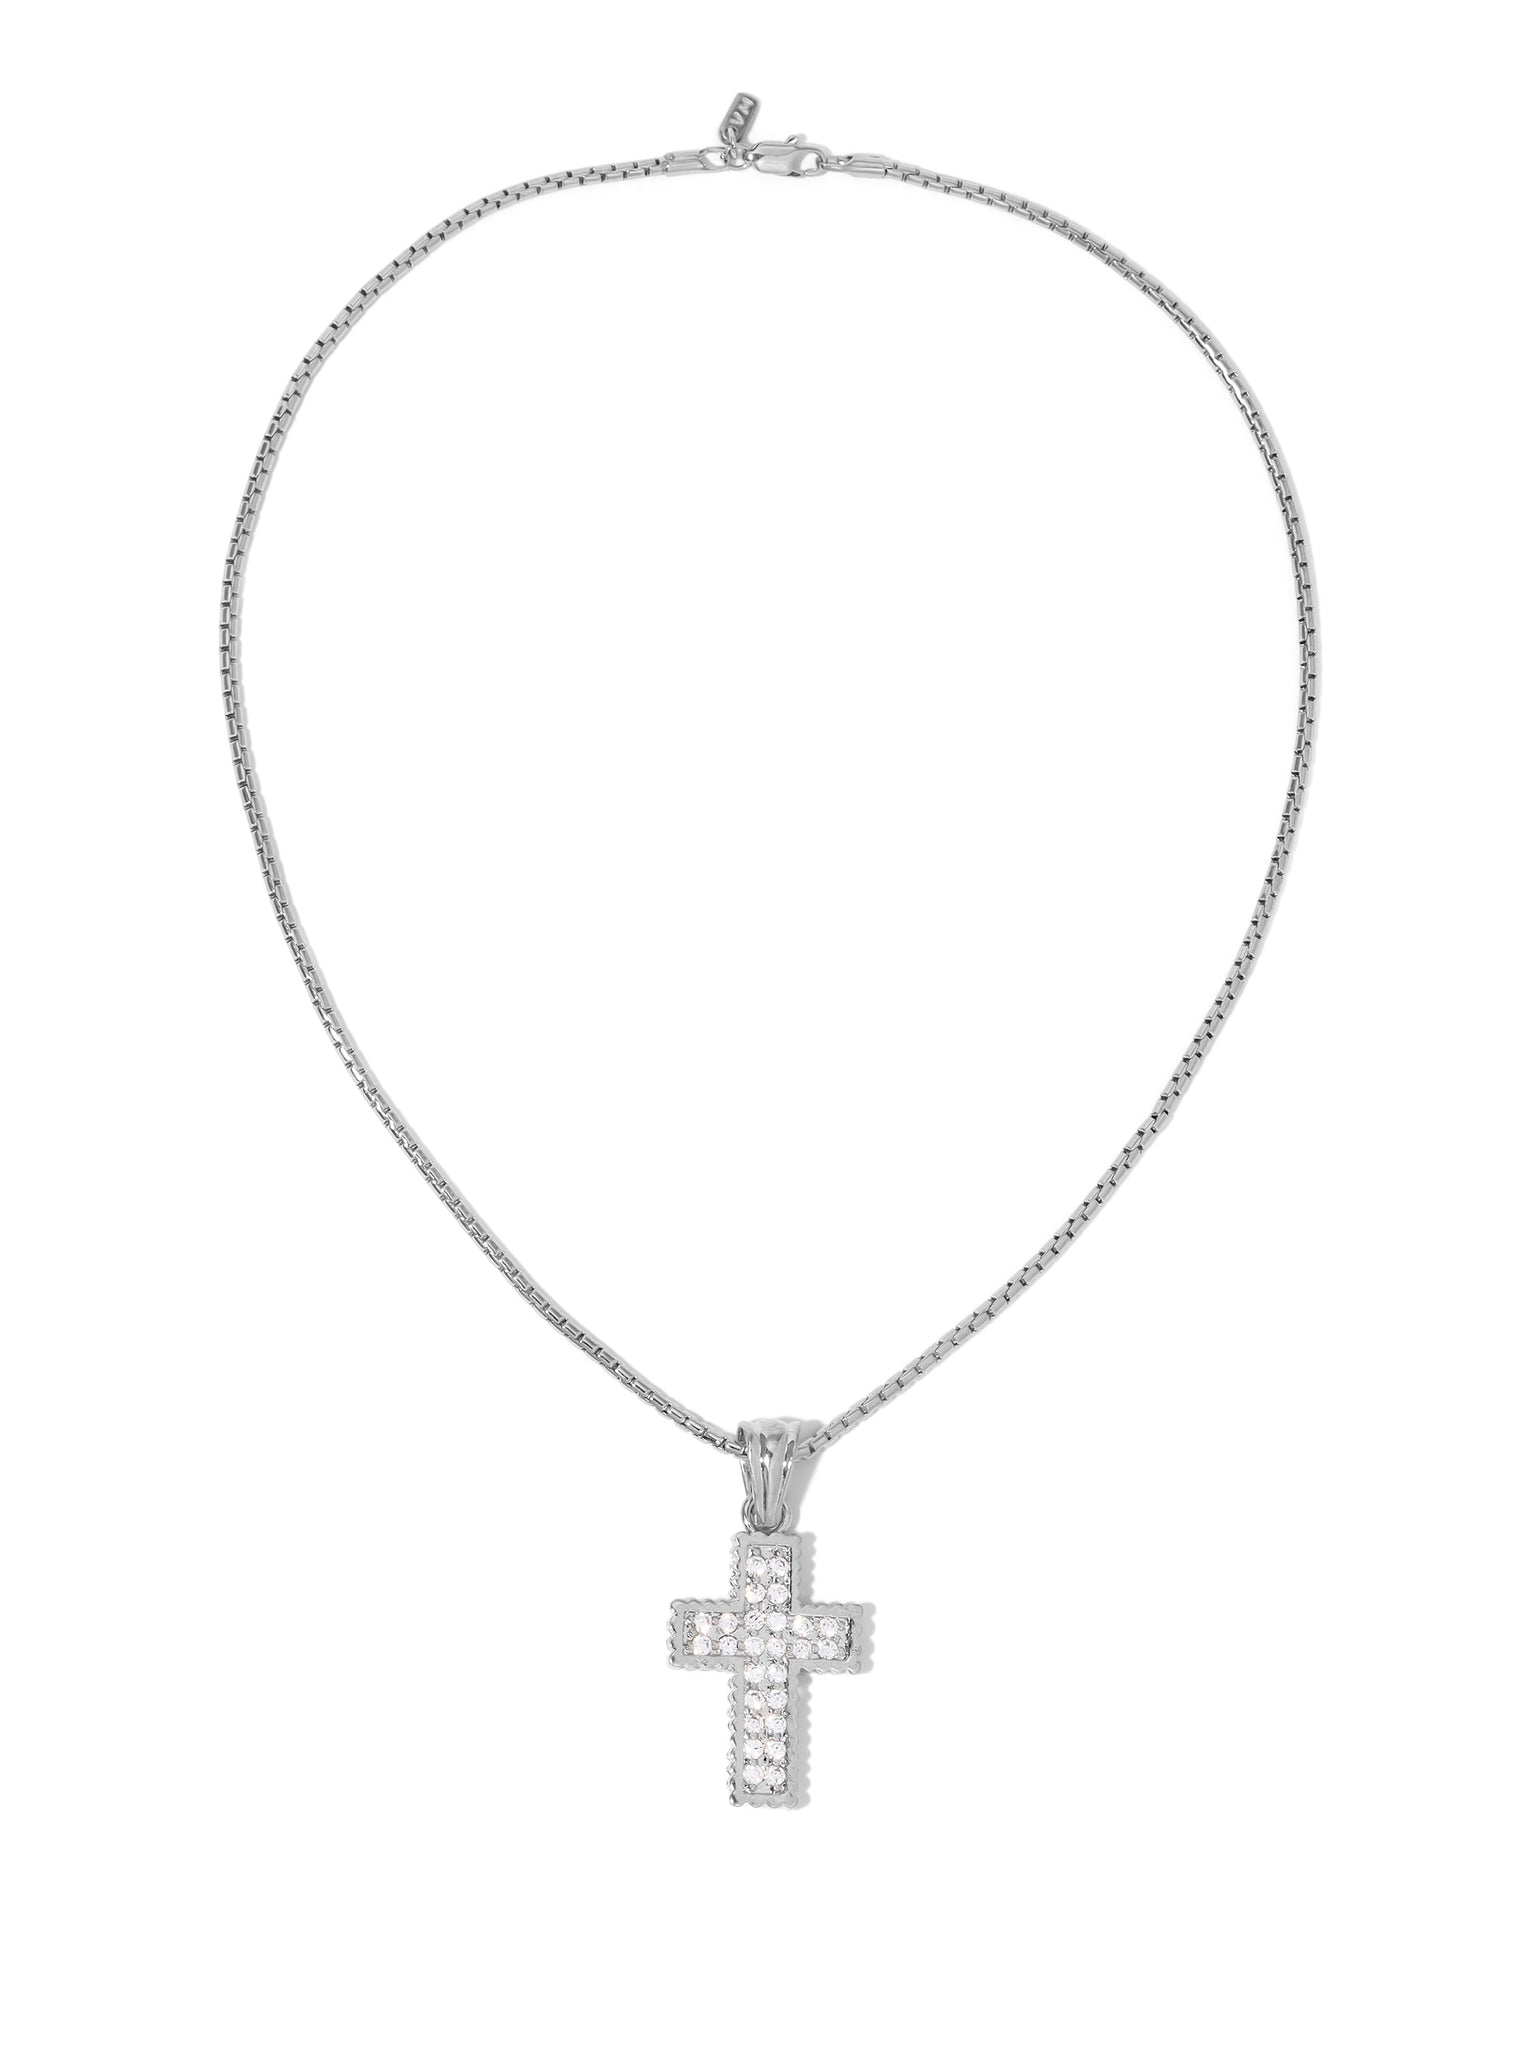 The Mariah Cross Necklace